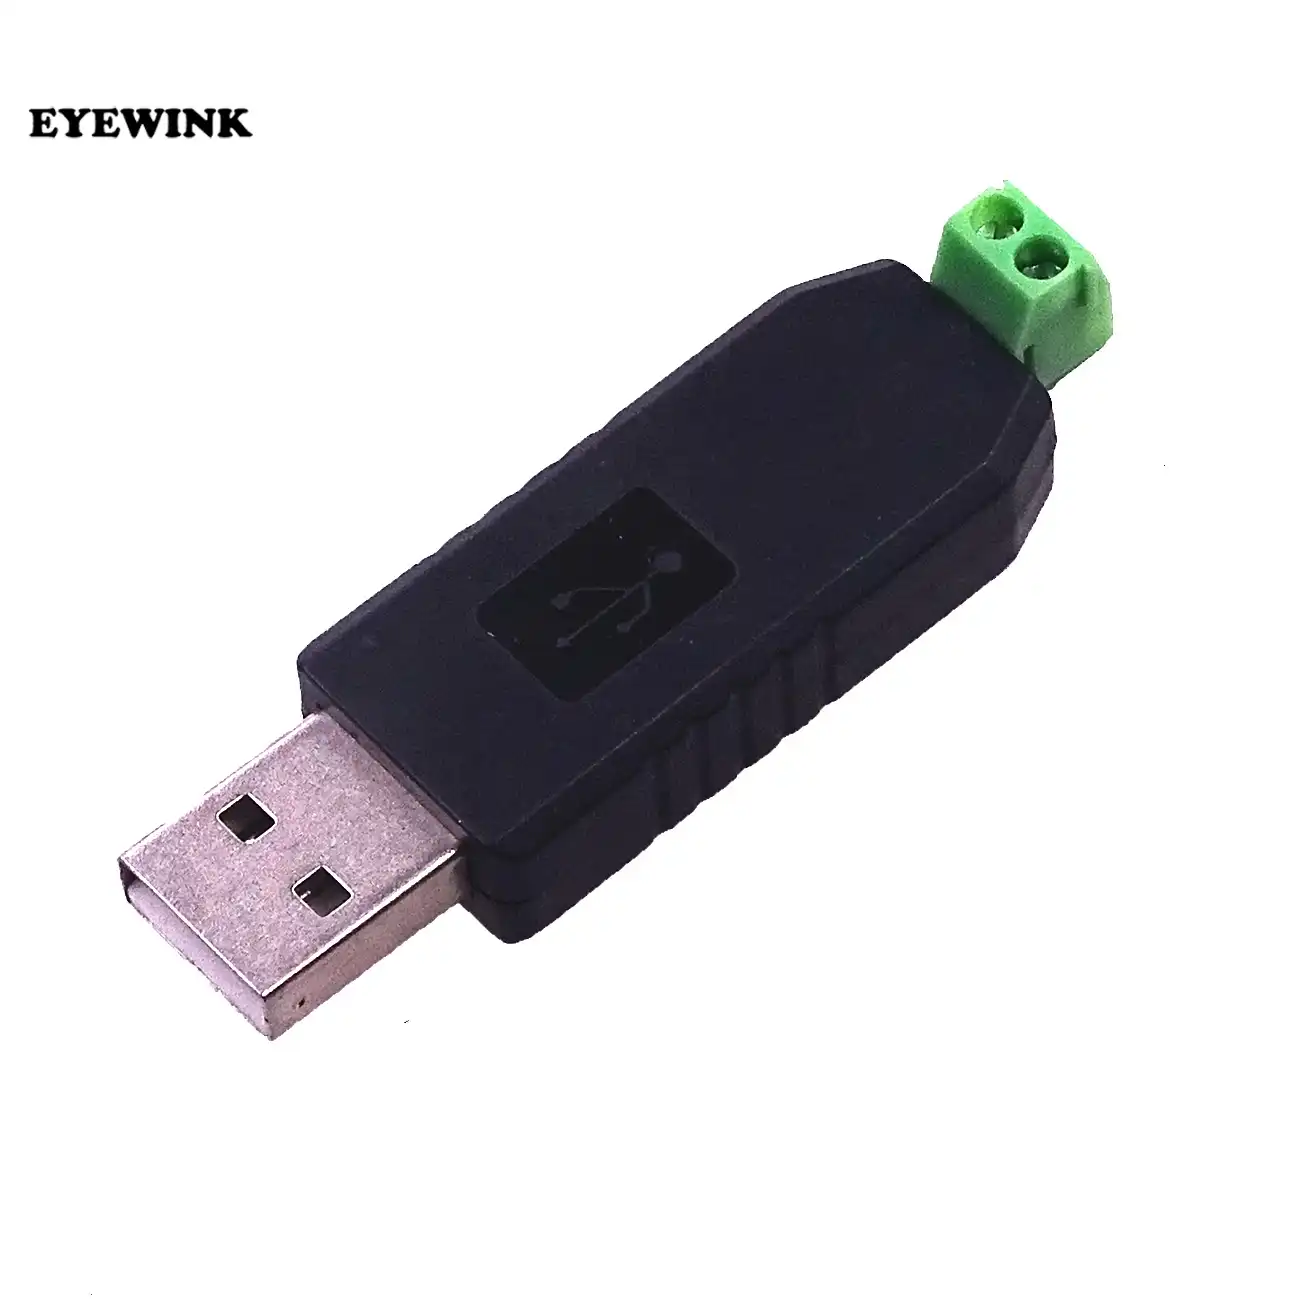 Cables Support Win7 XP Vista Linux USB to RS485 USB-485 Converter Adapter for Mac OS Whoelsale Hot New Arrival Cable Length: Other